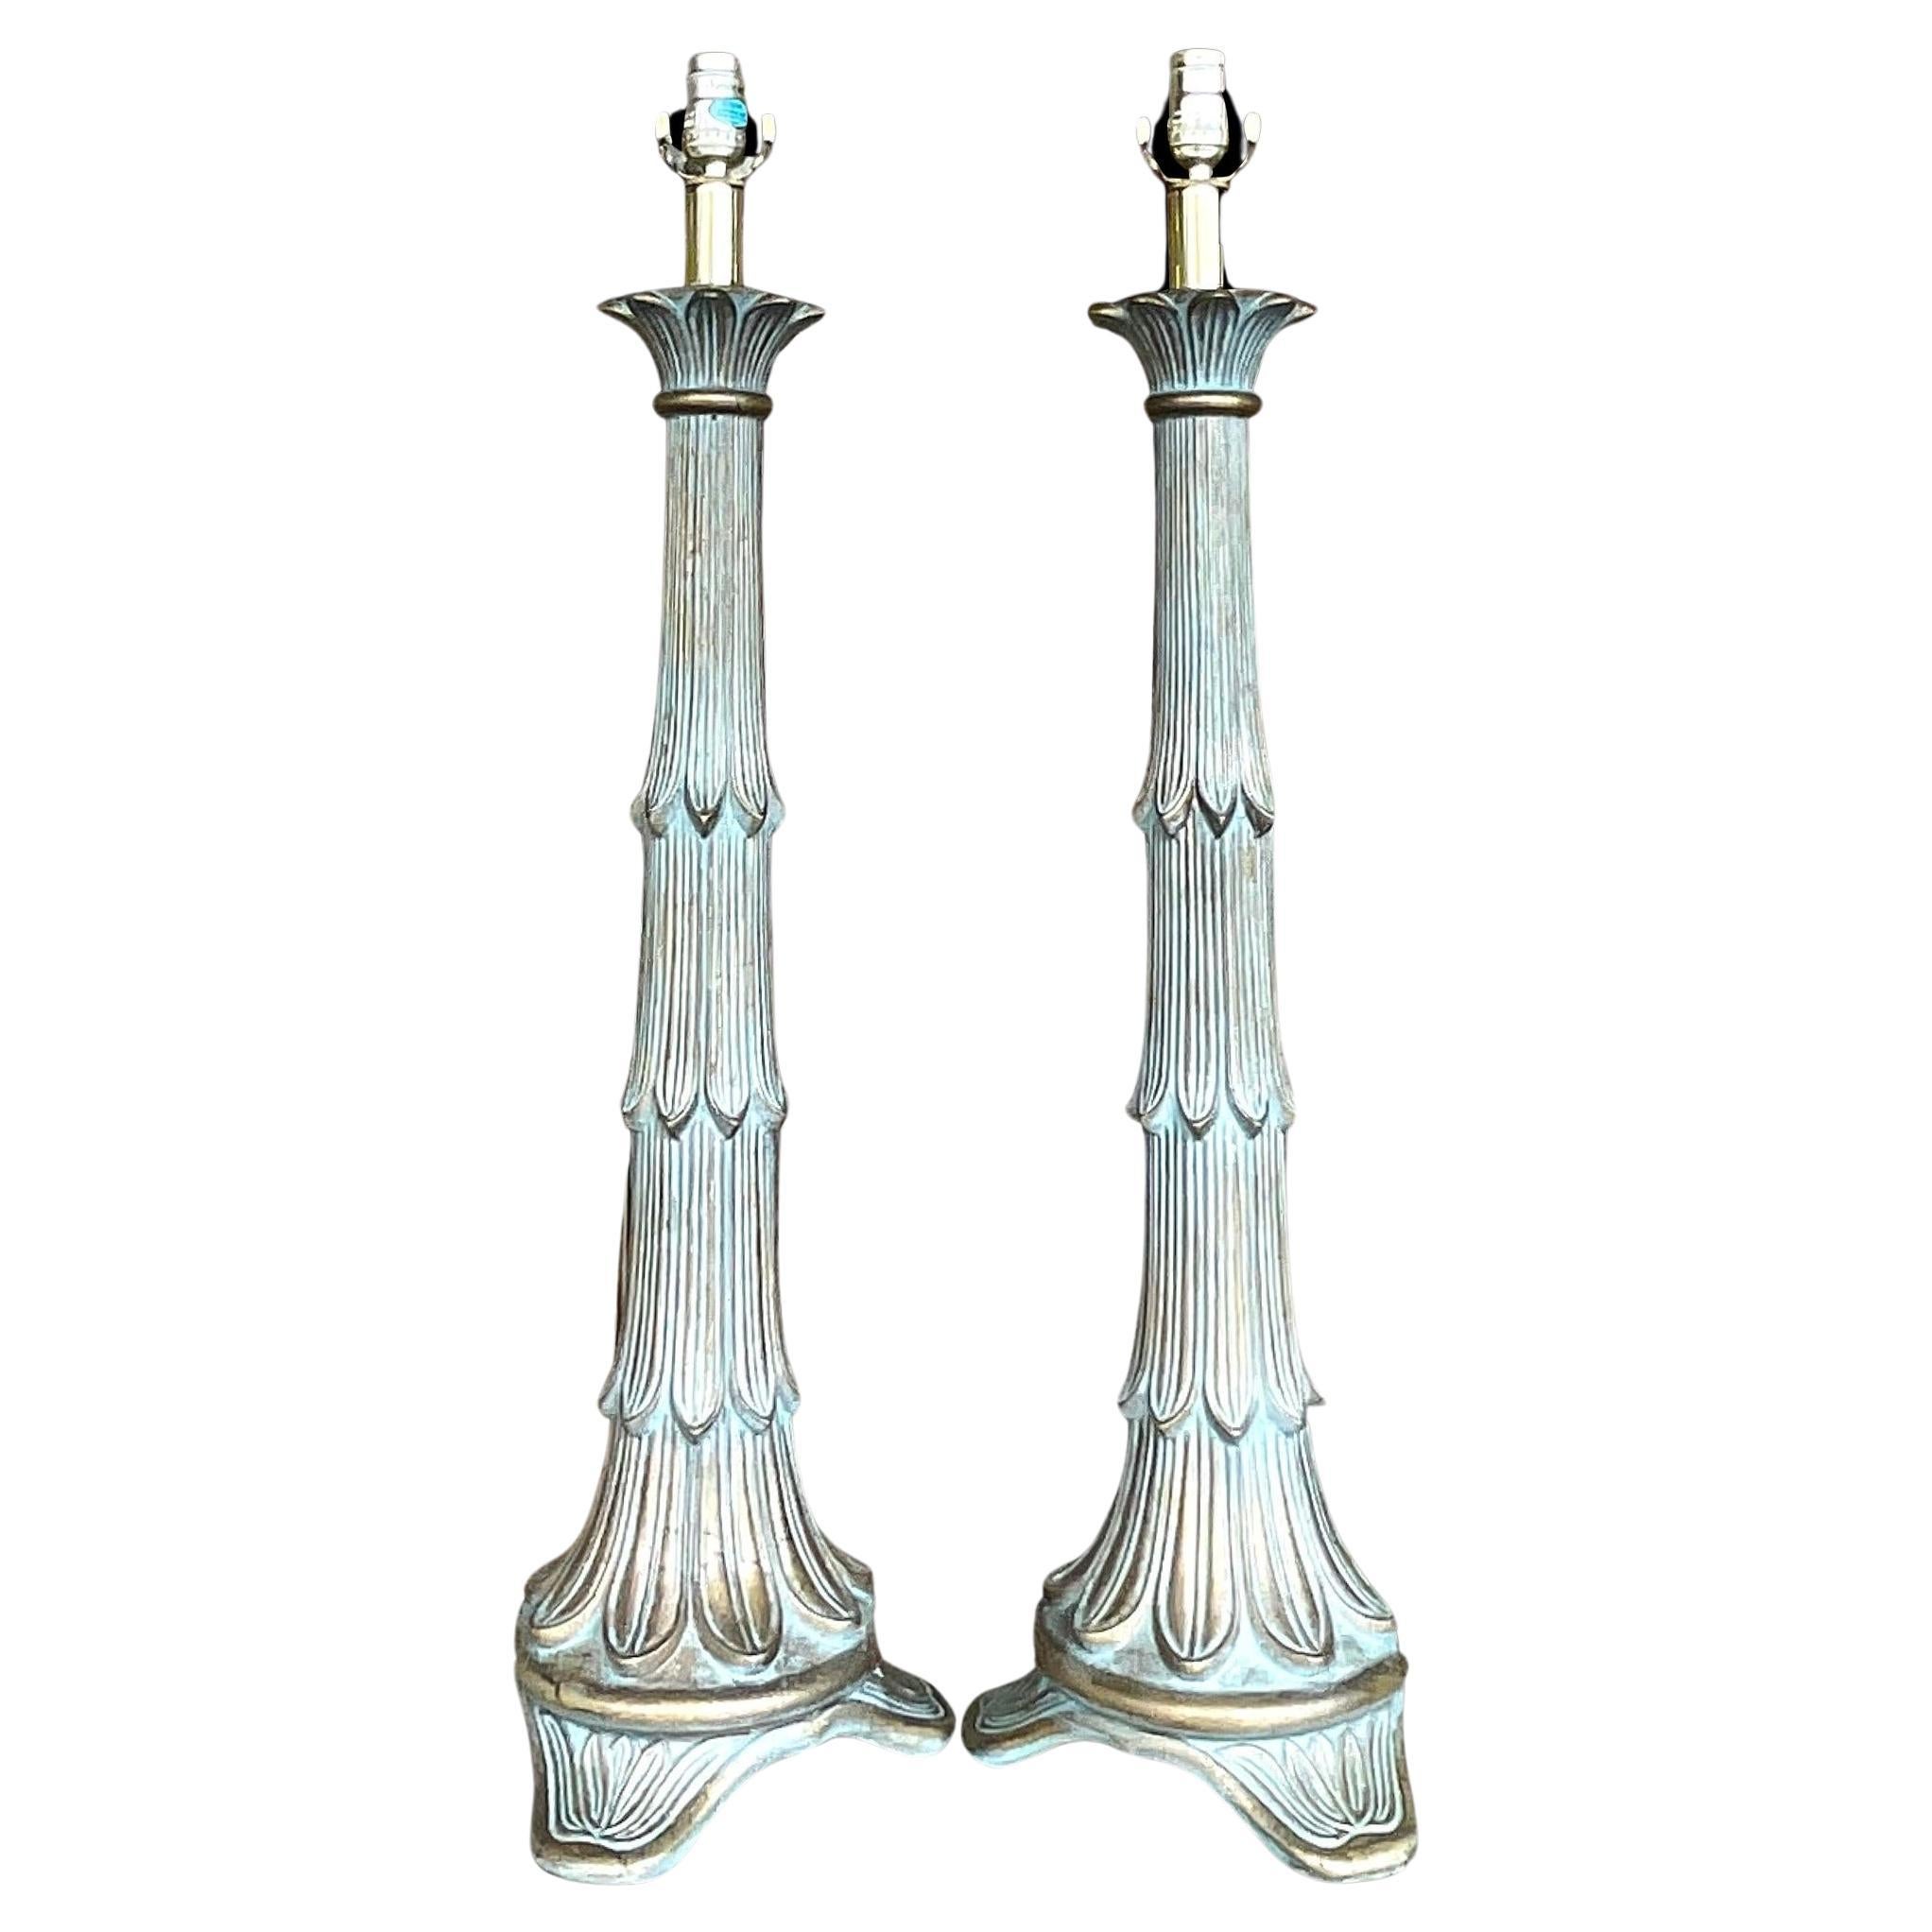 Late 20th Century Vintage Regency Florentine Plaster Table Lamps - a Pair For Sale